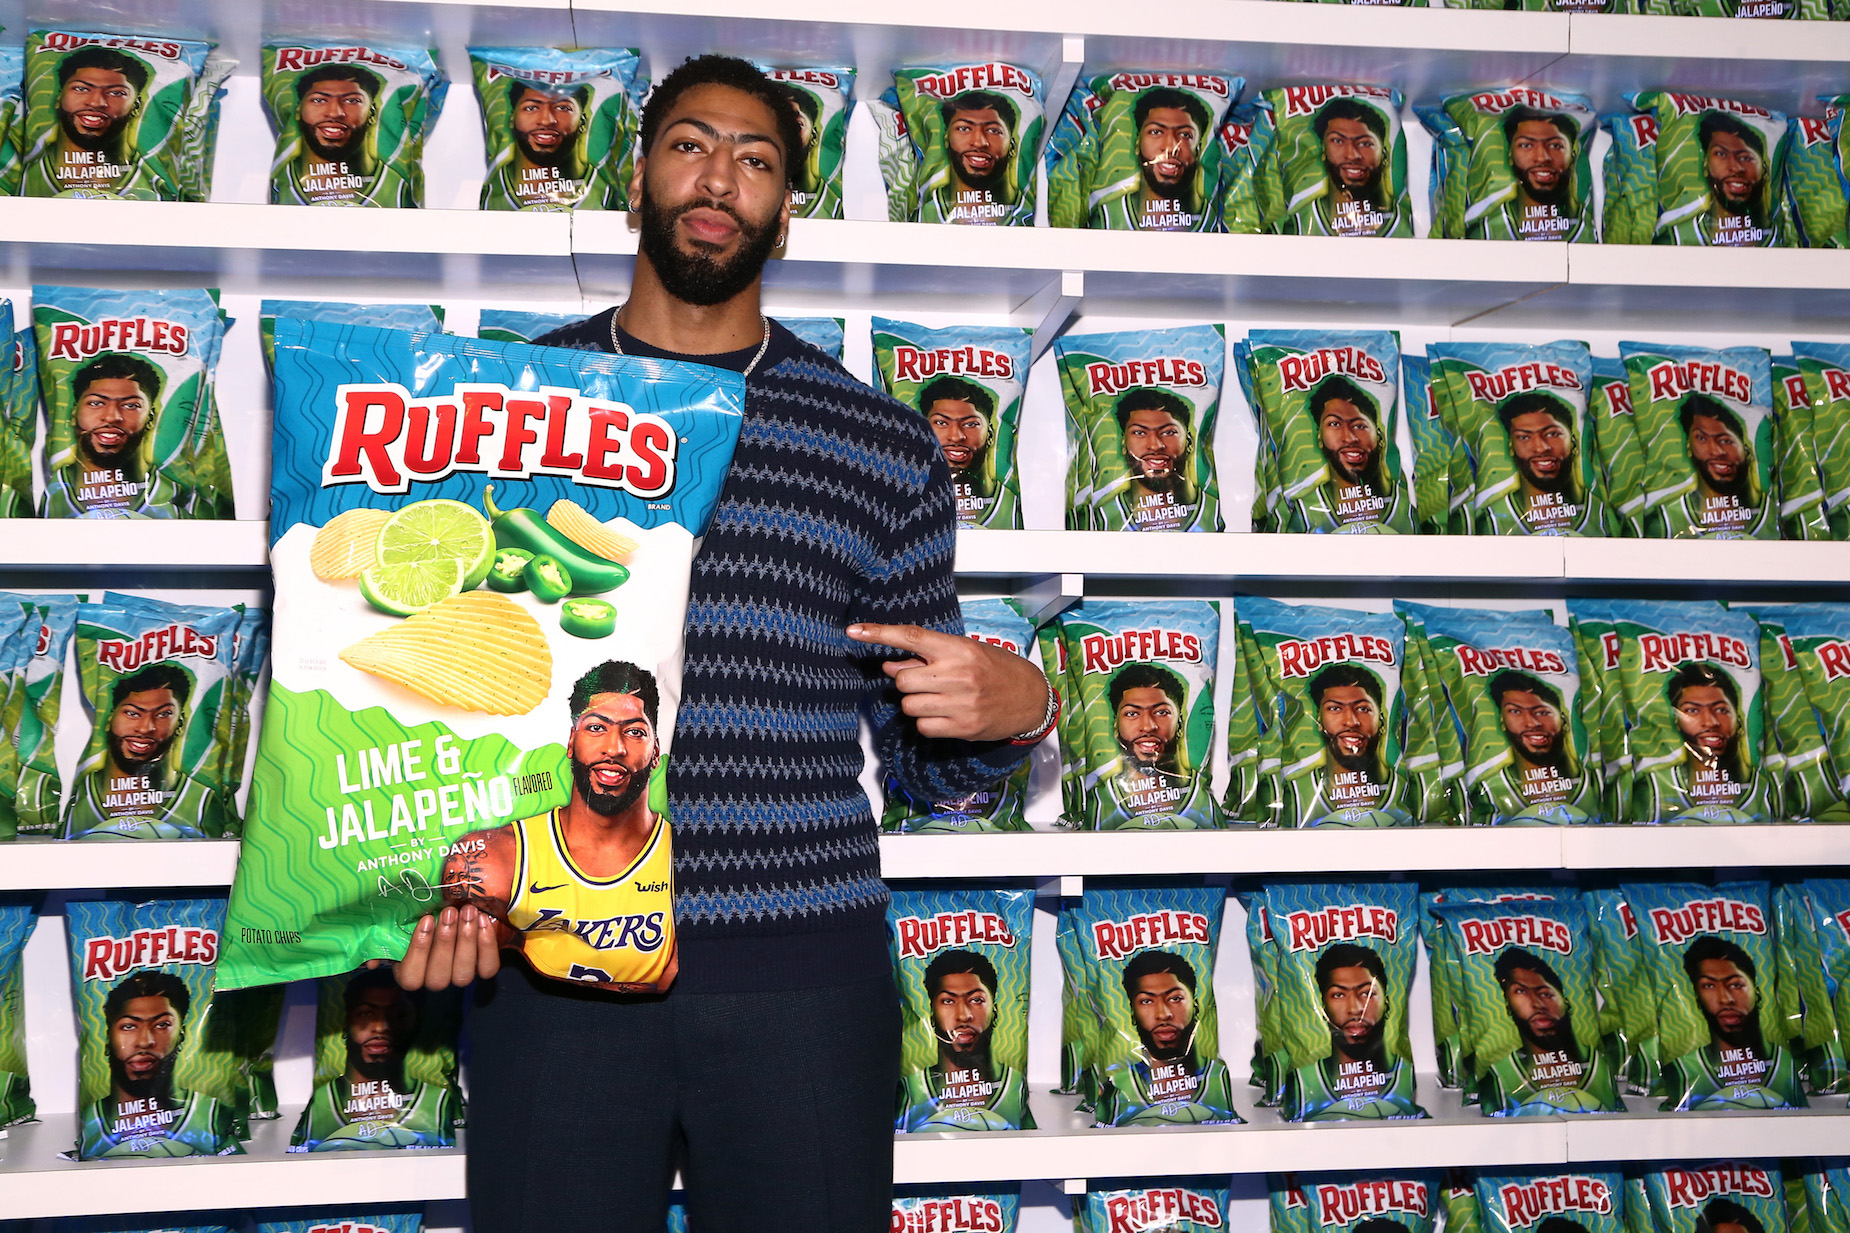 Shortly after joining the Lakers, Antony Davis signed a unique potato chip deal with Ruffles.